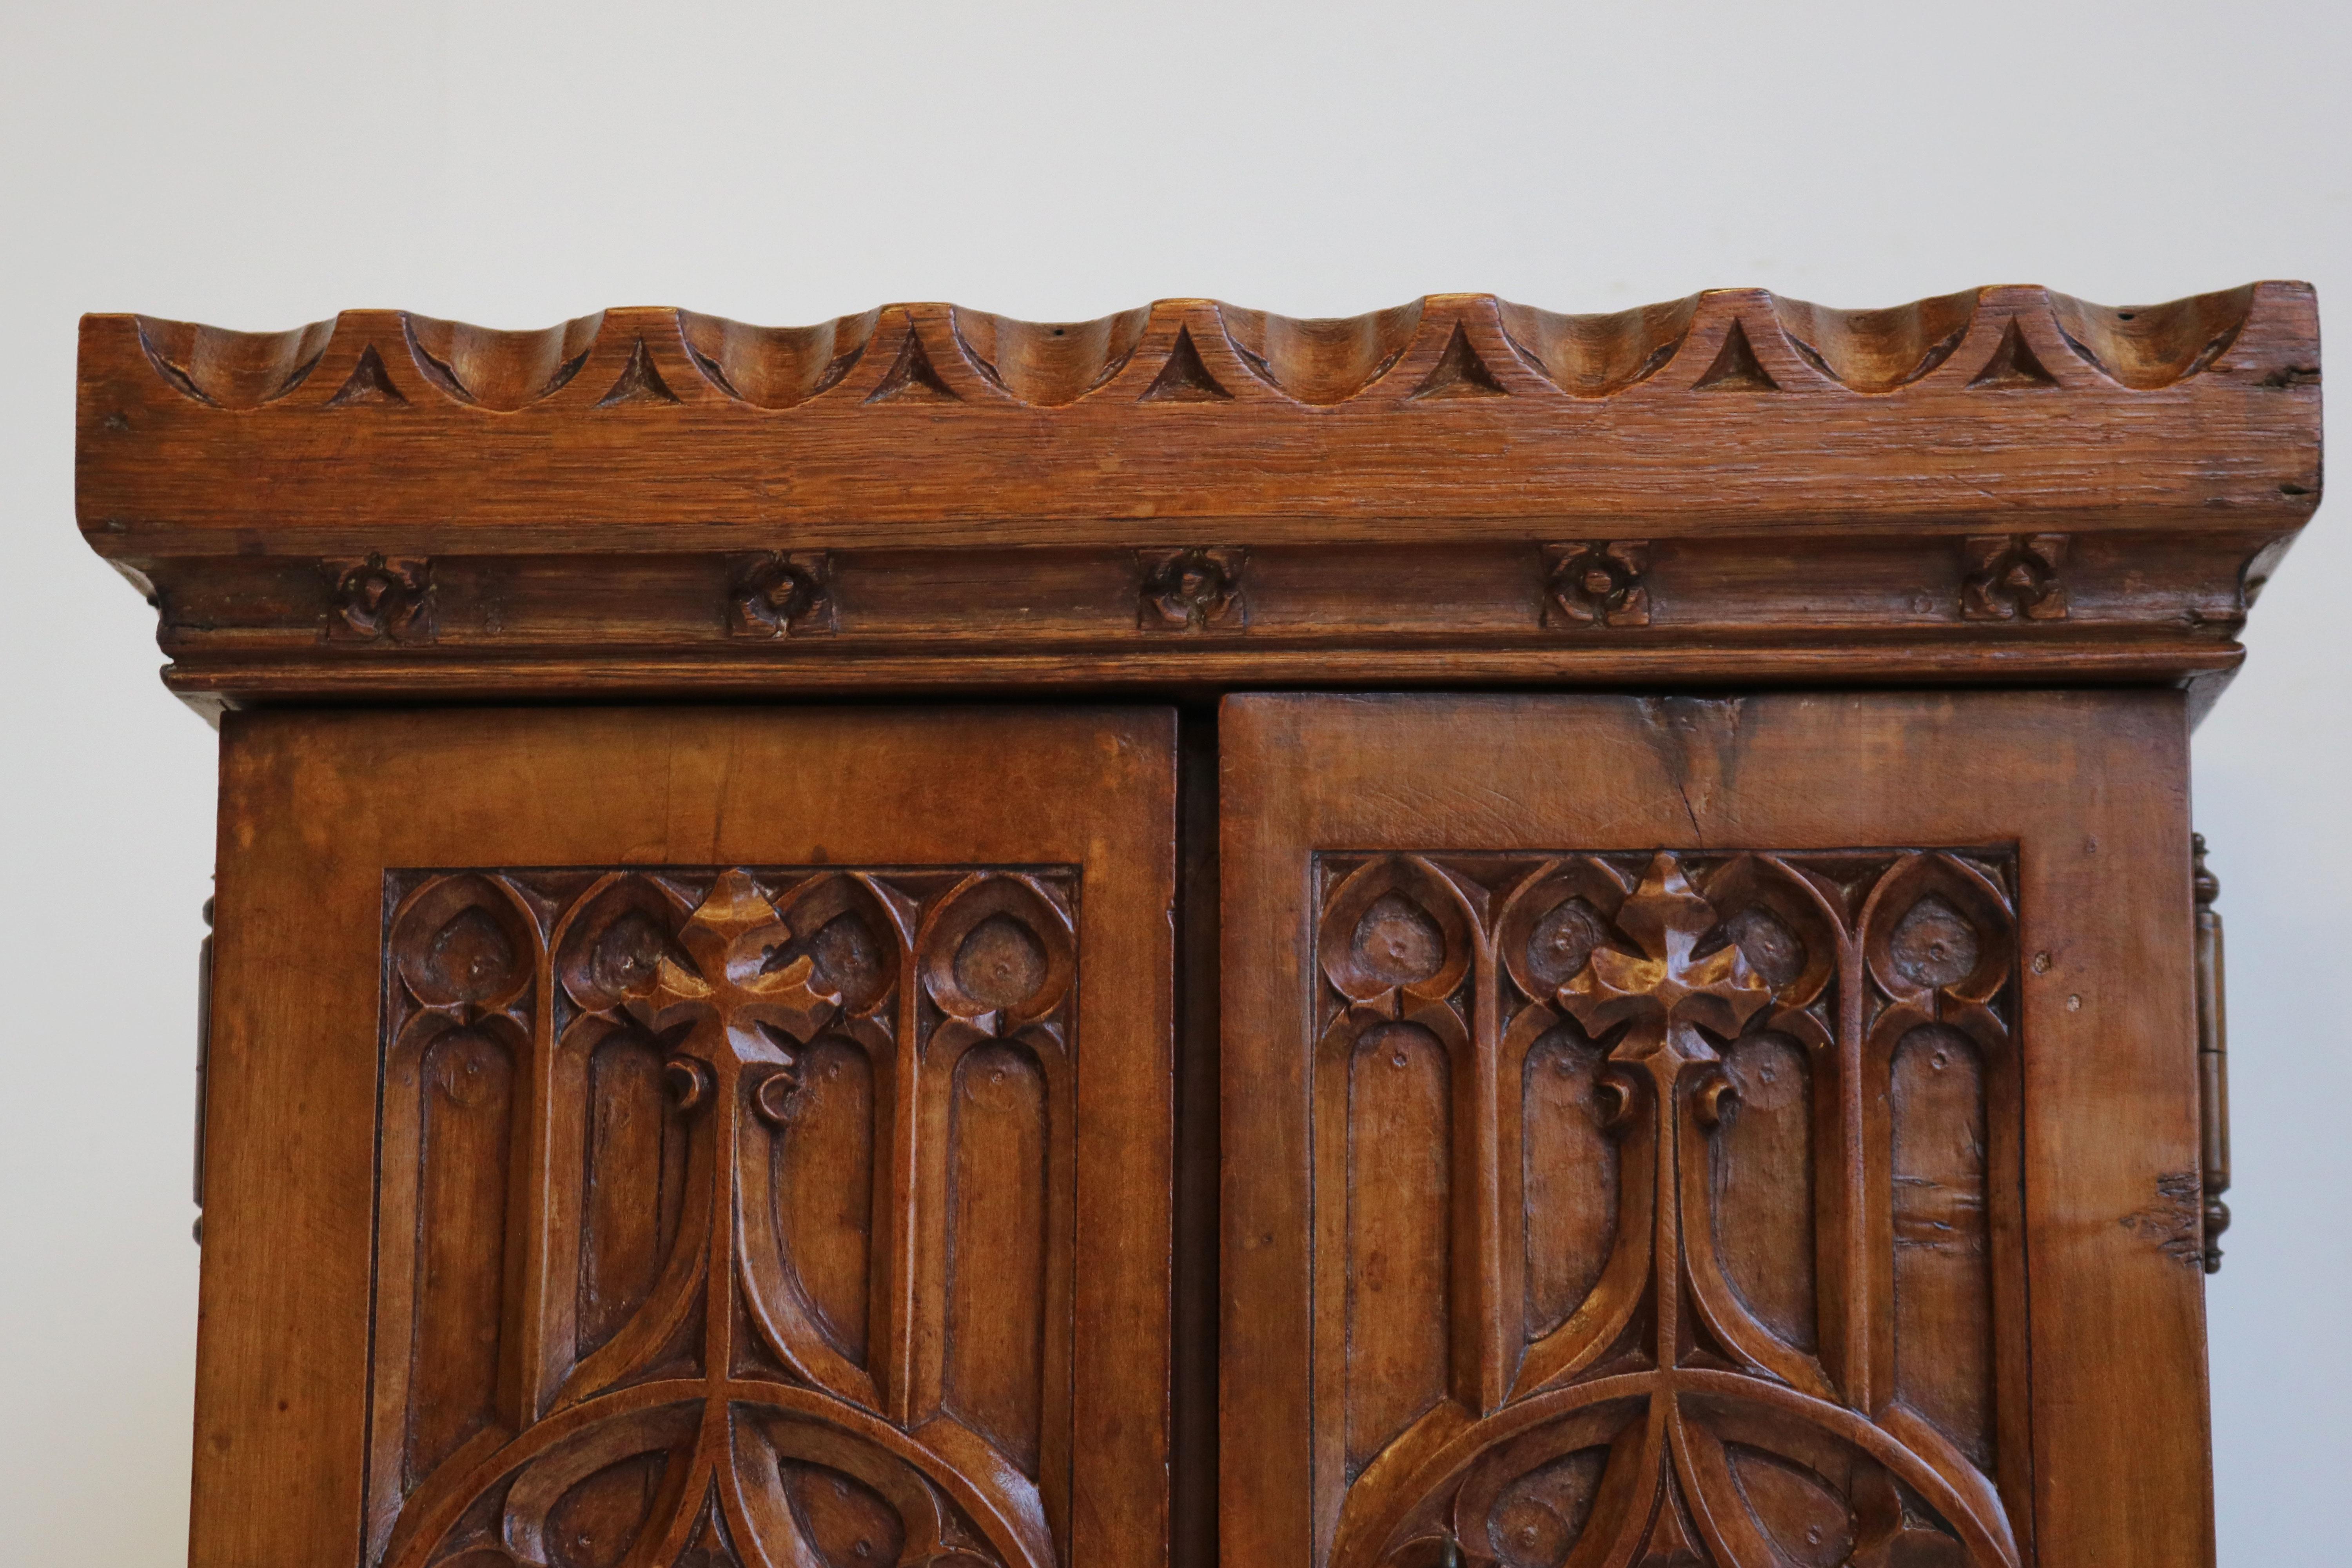 Very rare & marvelous ! This 19th century Gothic Revival wall cabinet / small cabinet from a French Church. 
The cabinet is richly decorated with Gothic style carving such as the impressive cathedral arches on the doors. 
Comes with original